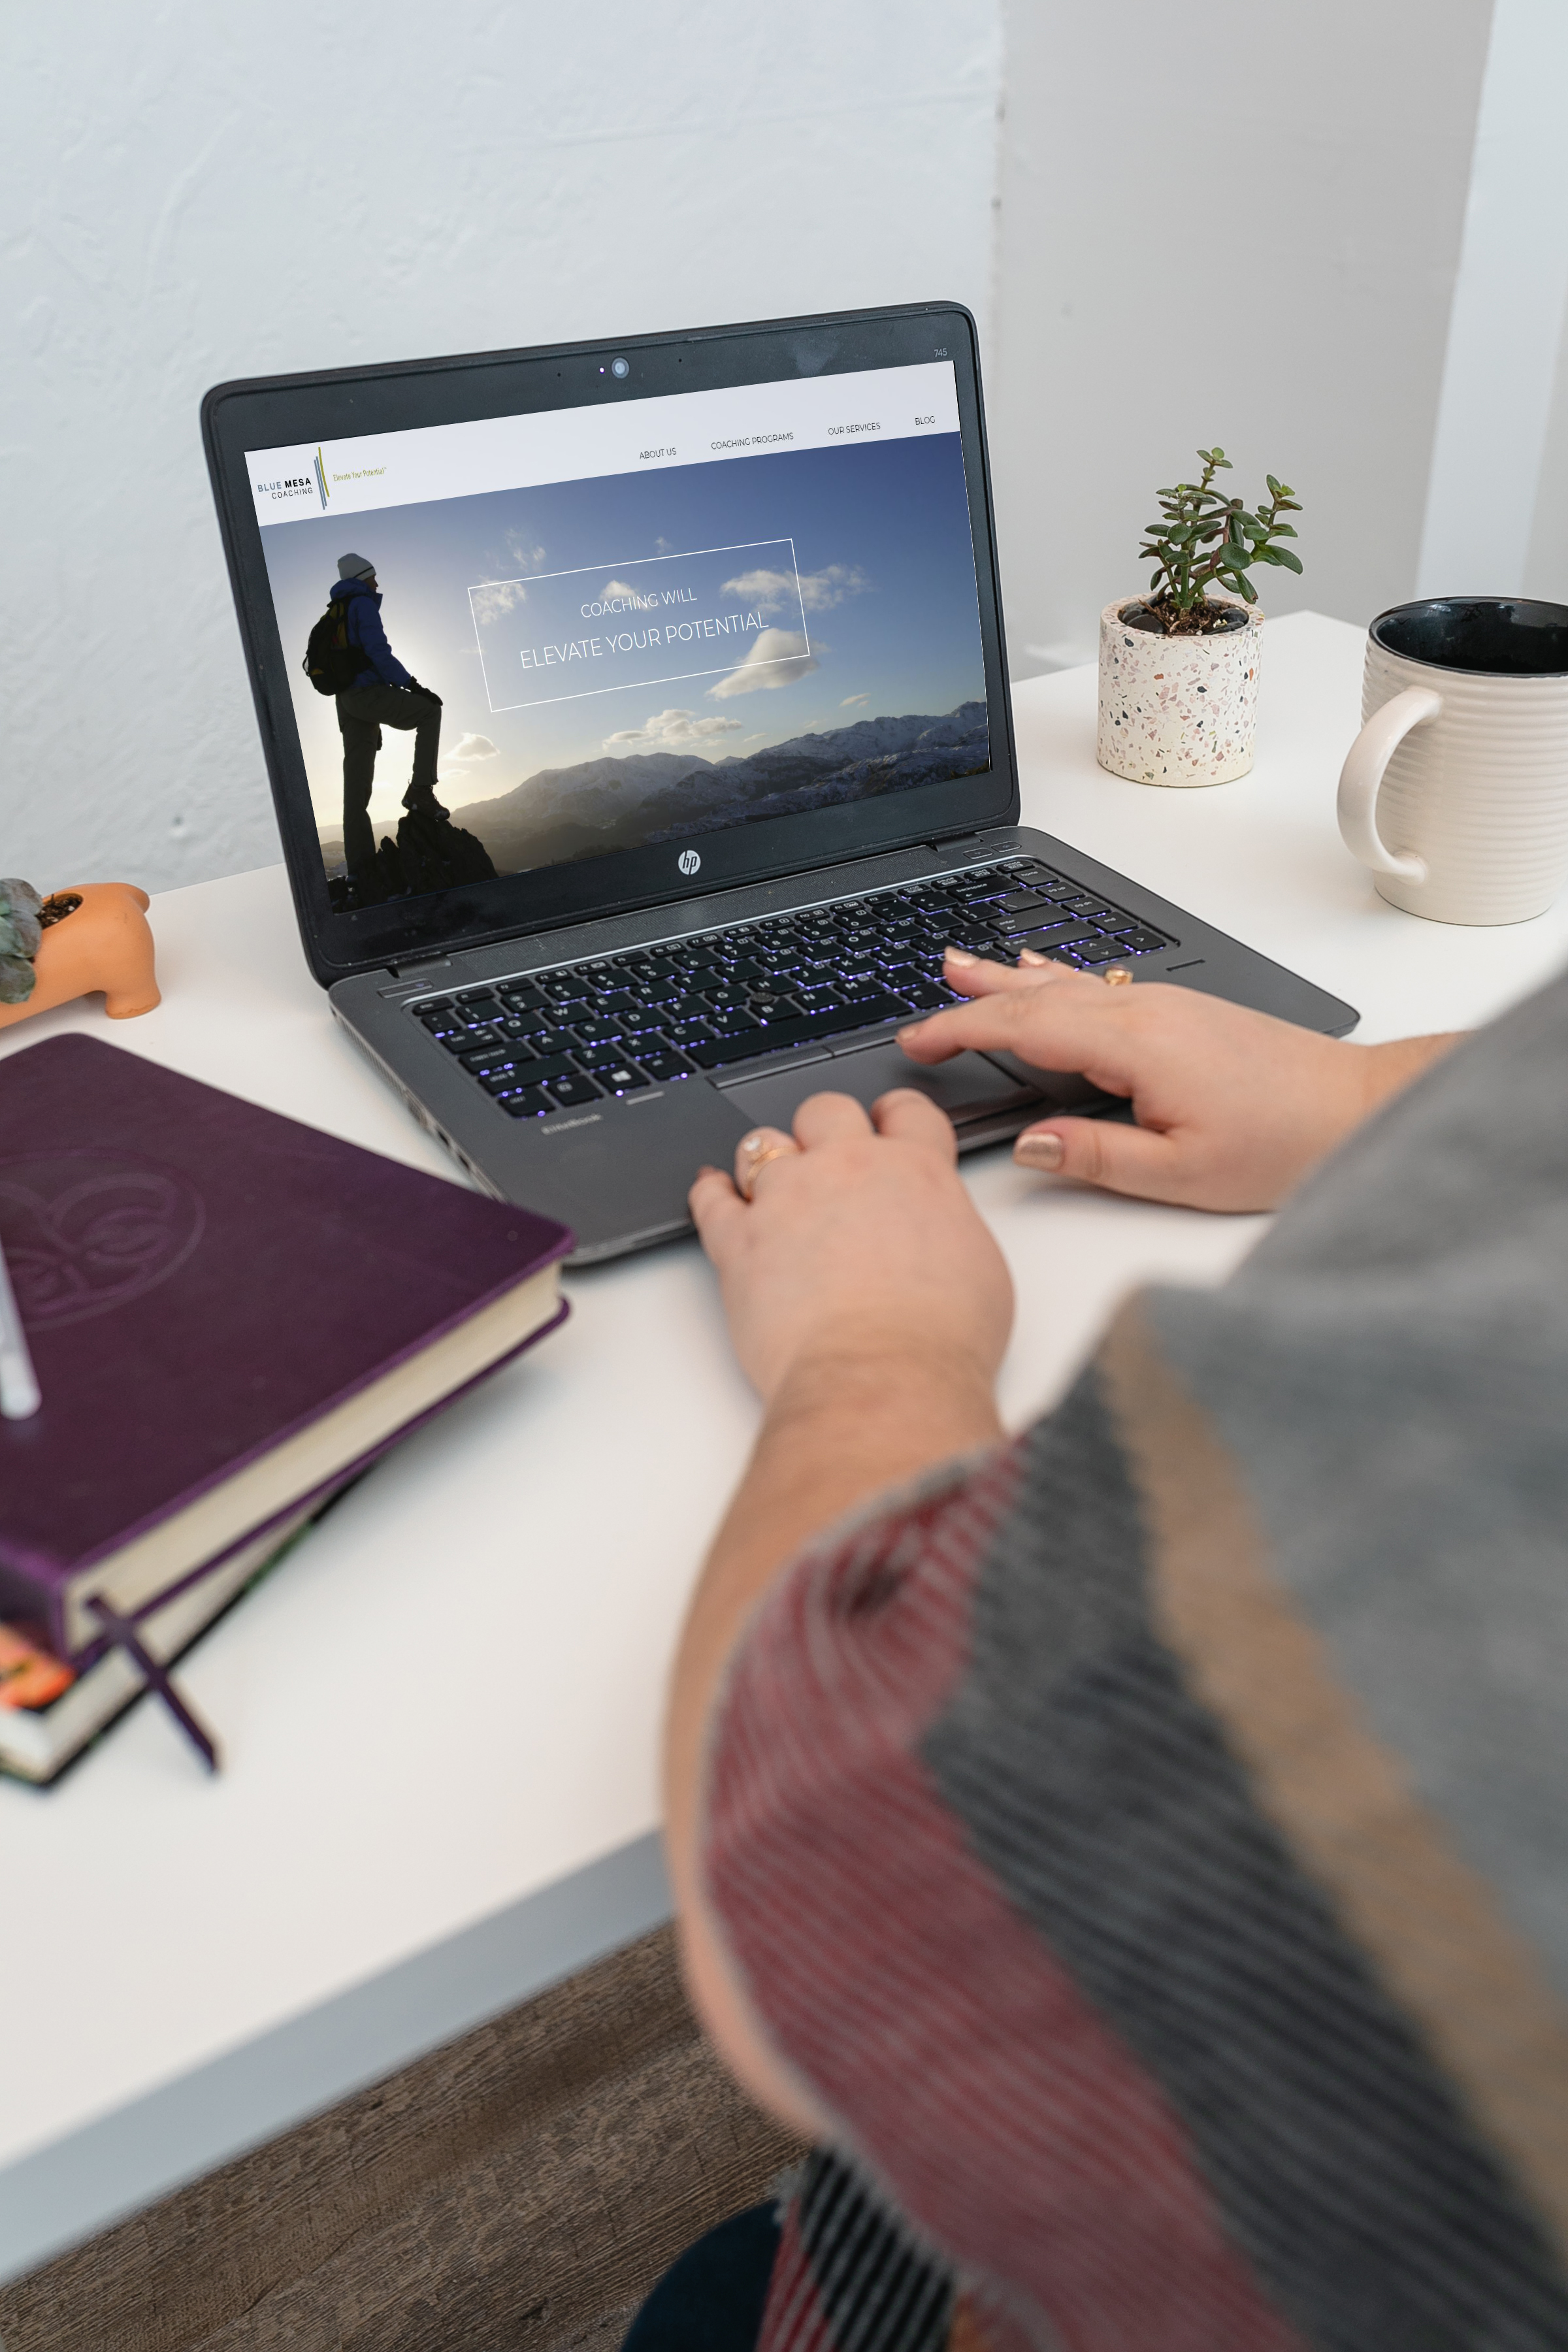 Cut off view of person typing at a laptop with journals and coffee mug surrounding them.